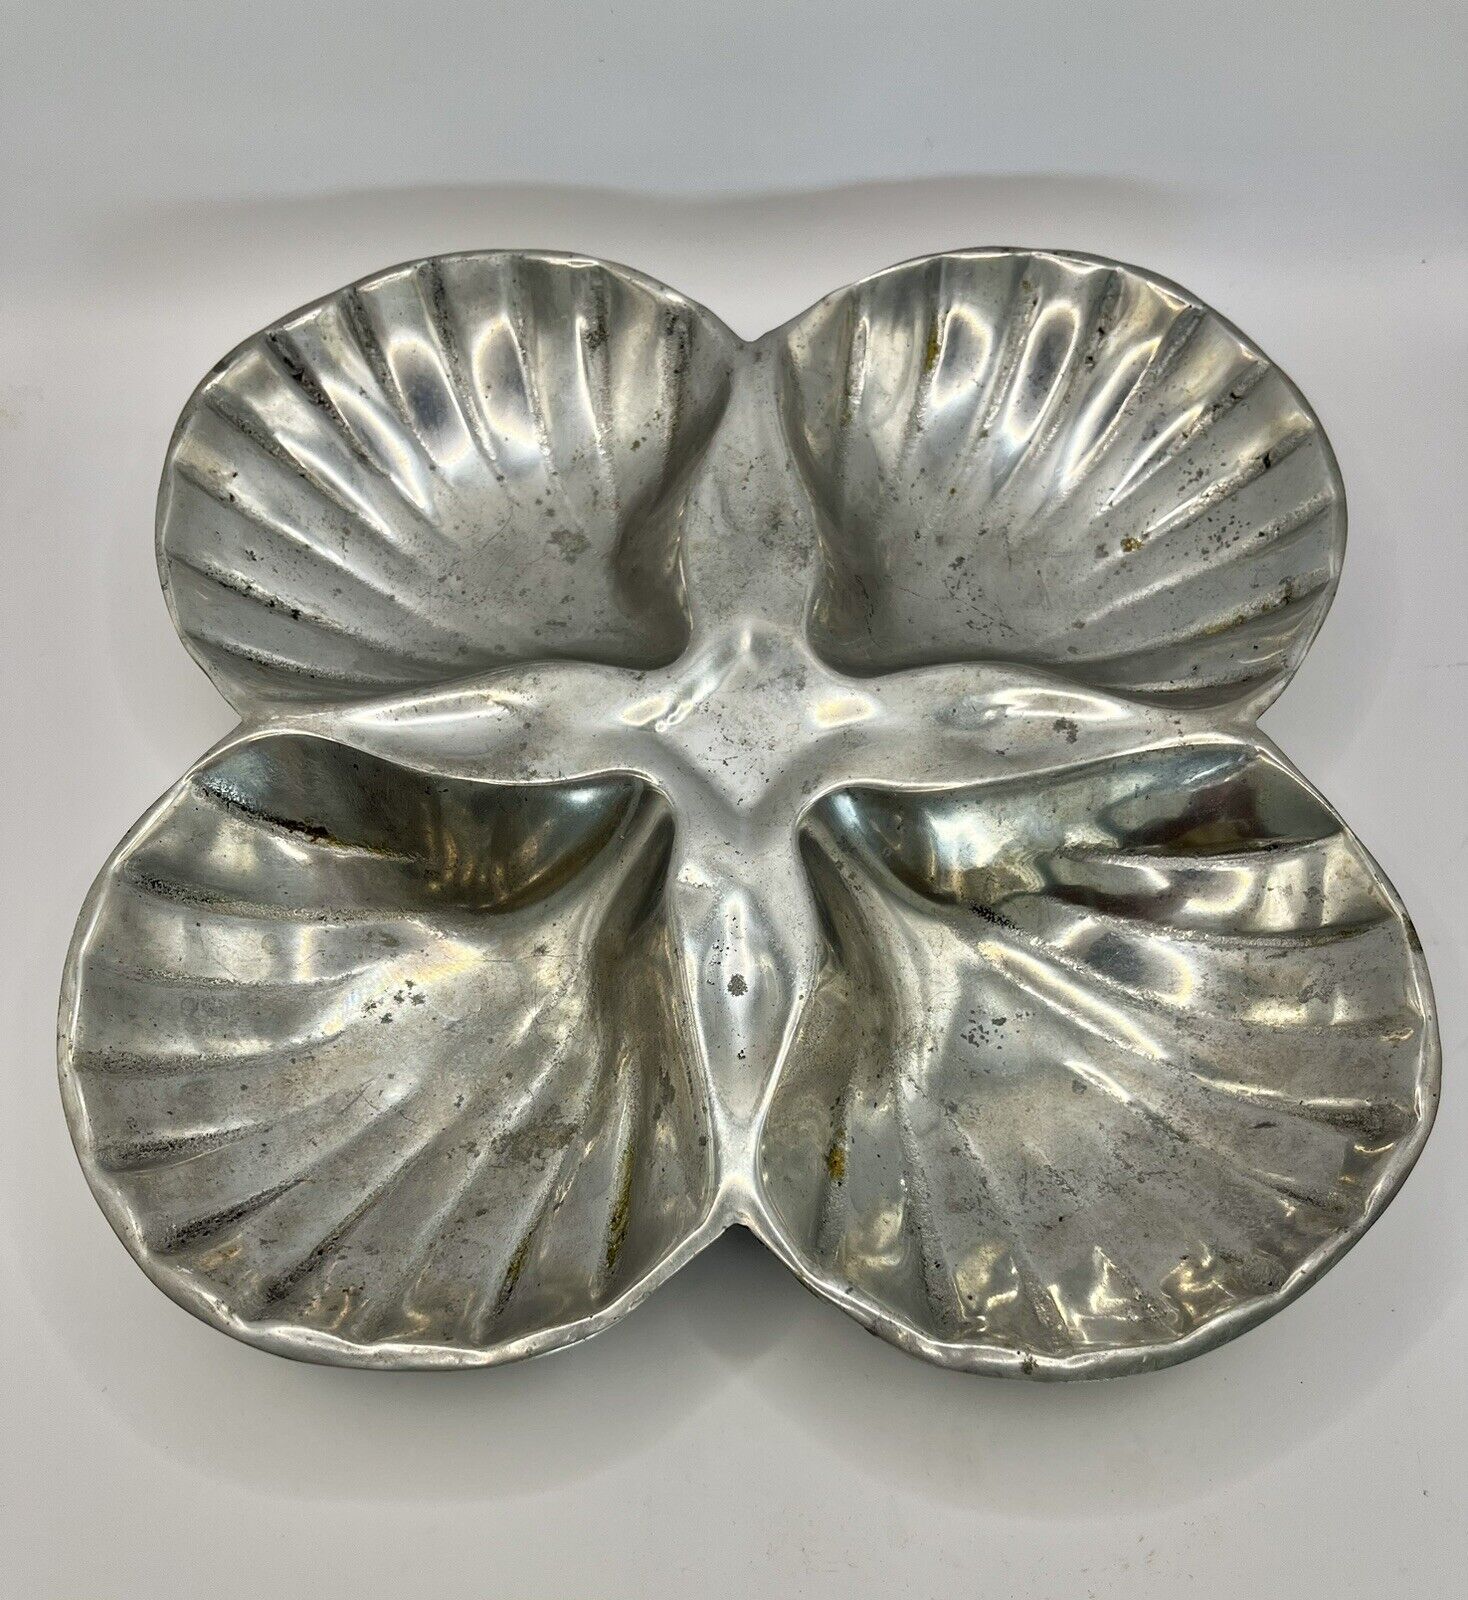 Vintage pewter seashell 4 Compartment Dish